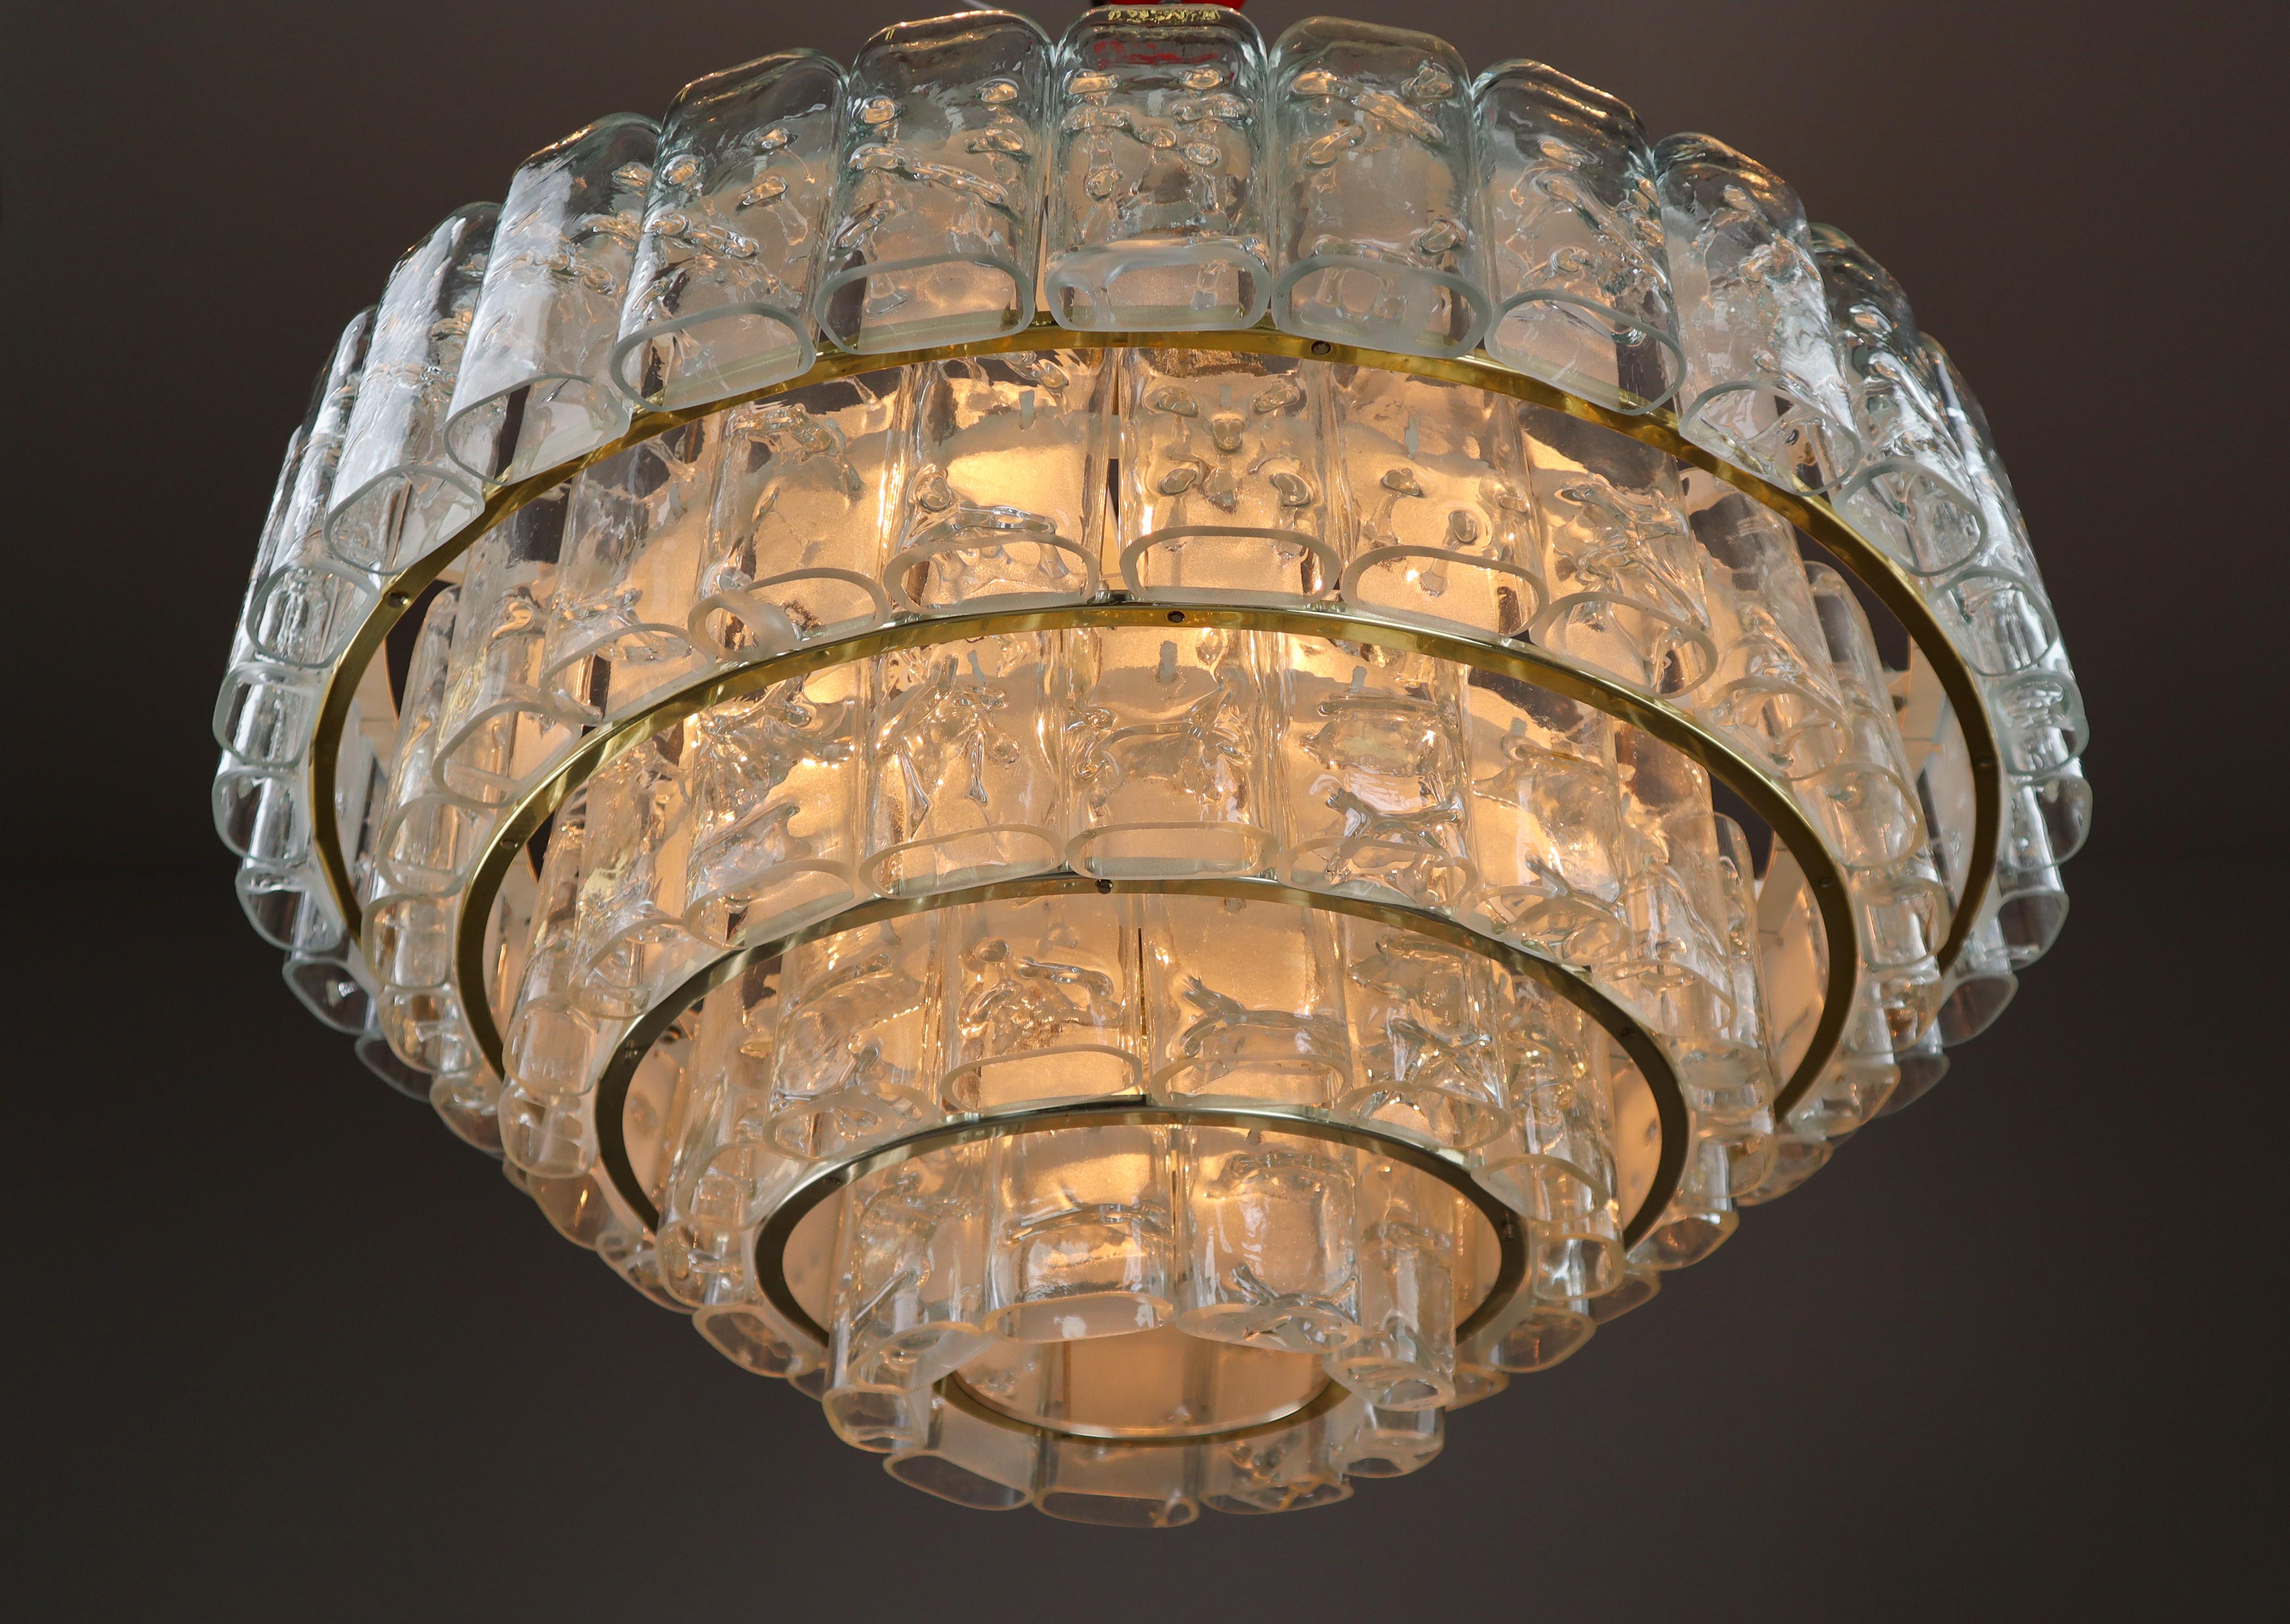 Grande Midcentury-Modern Chandelier by Doria Leuchten, Germany, 1960s.

The fixture consists of layers with several hand-blown textured glass tubes (and five reserves) mounted on a frame arranged in concentric rings. This size high-end Doria flush